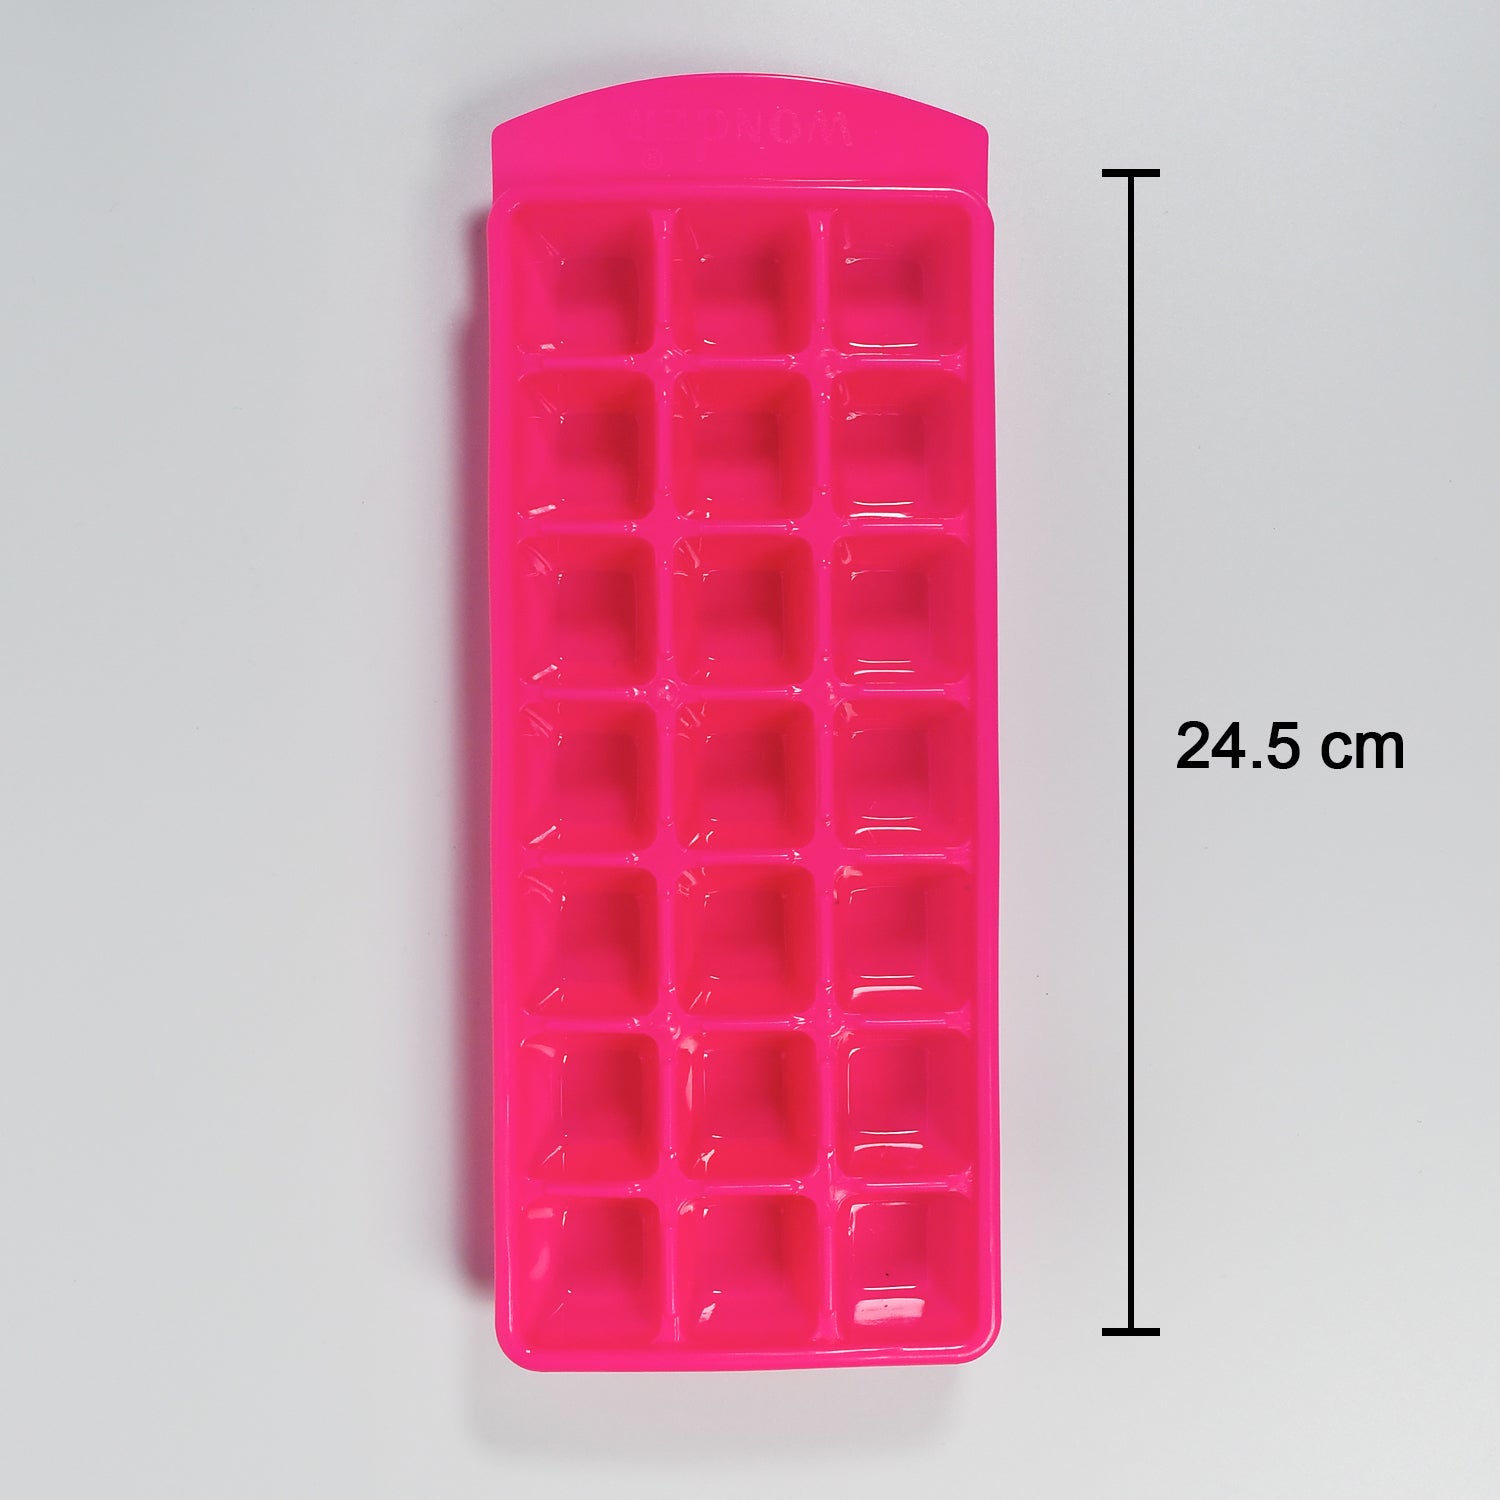 5299 Ice Cubes Tray, Easy to Clean Non‑Toxic Ice Mold Safe for Freezing Coffee Fruits for Family DeoDap